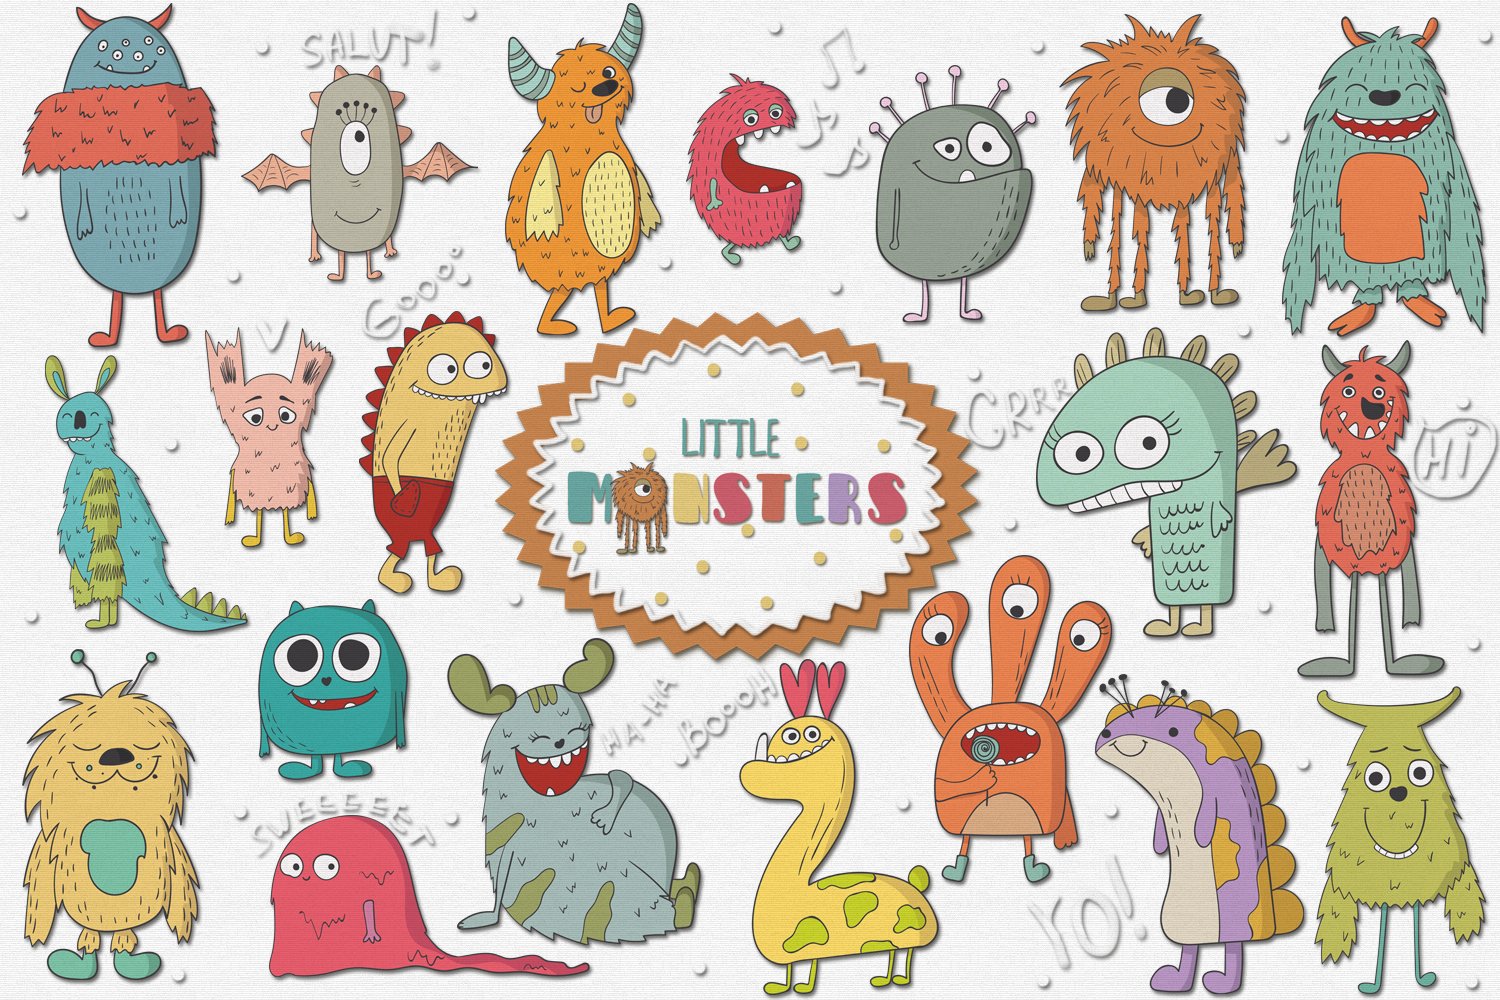 Little Monsters cover image.